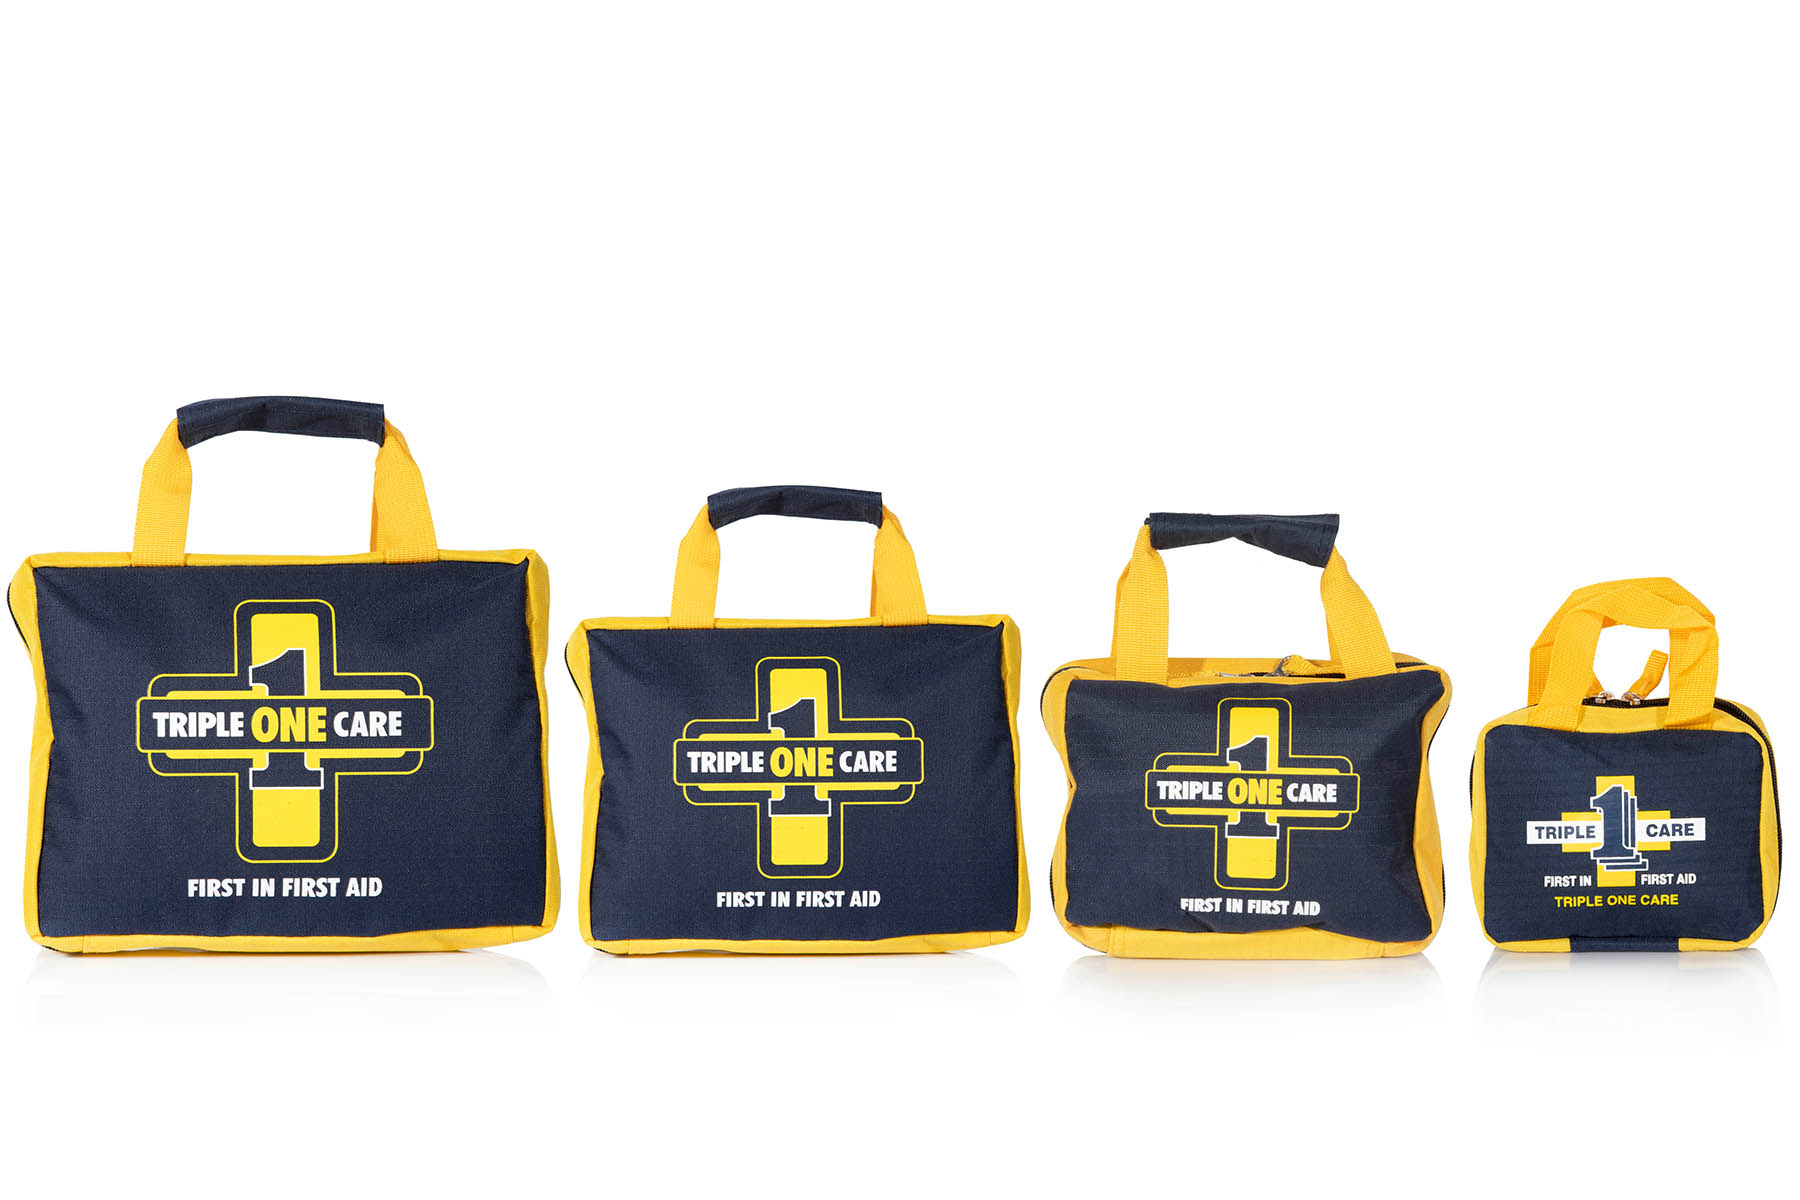 4 sizes of First aid kits